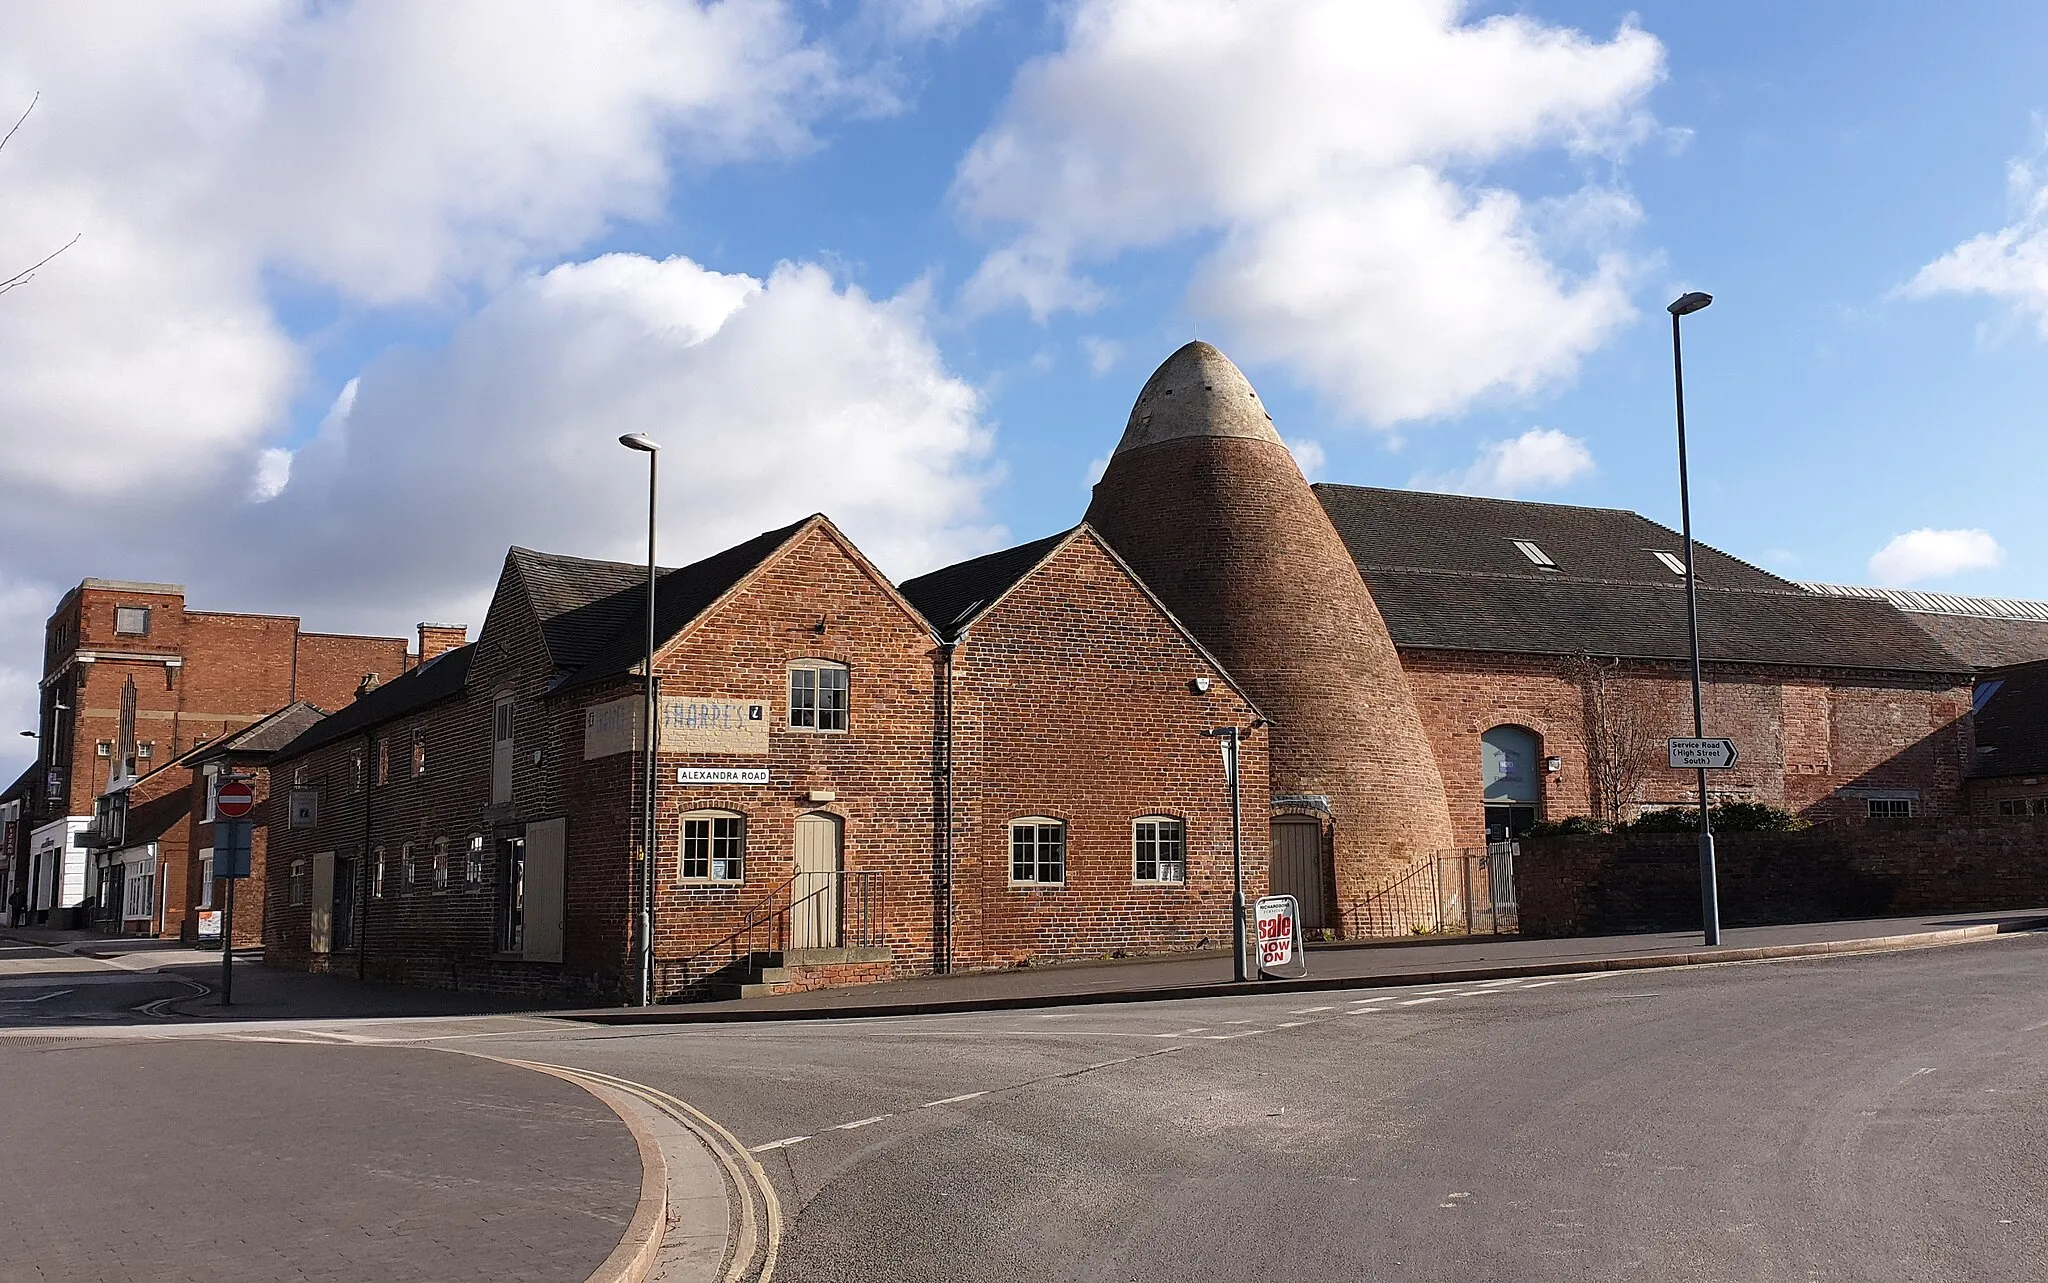 Photo showing: Picture shows Sharpe's Pottery Museum building located in Swadlincote, South Derbyshire